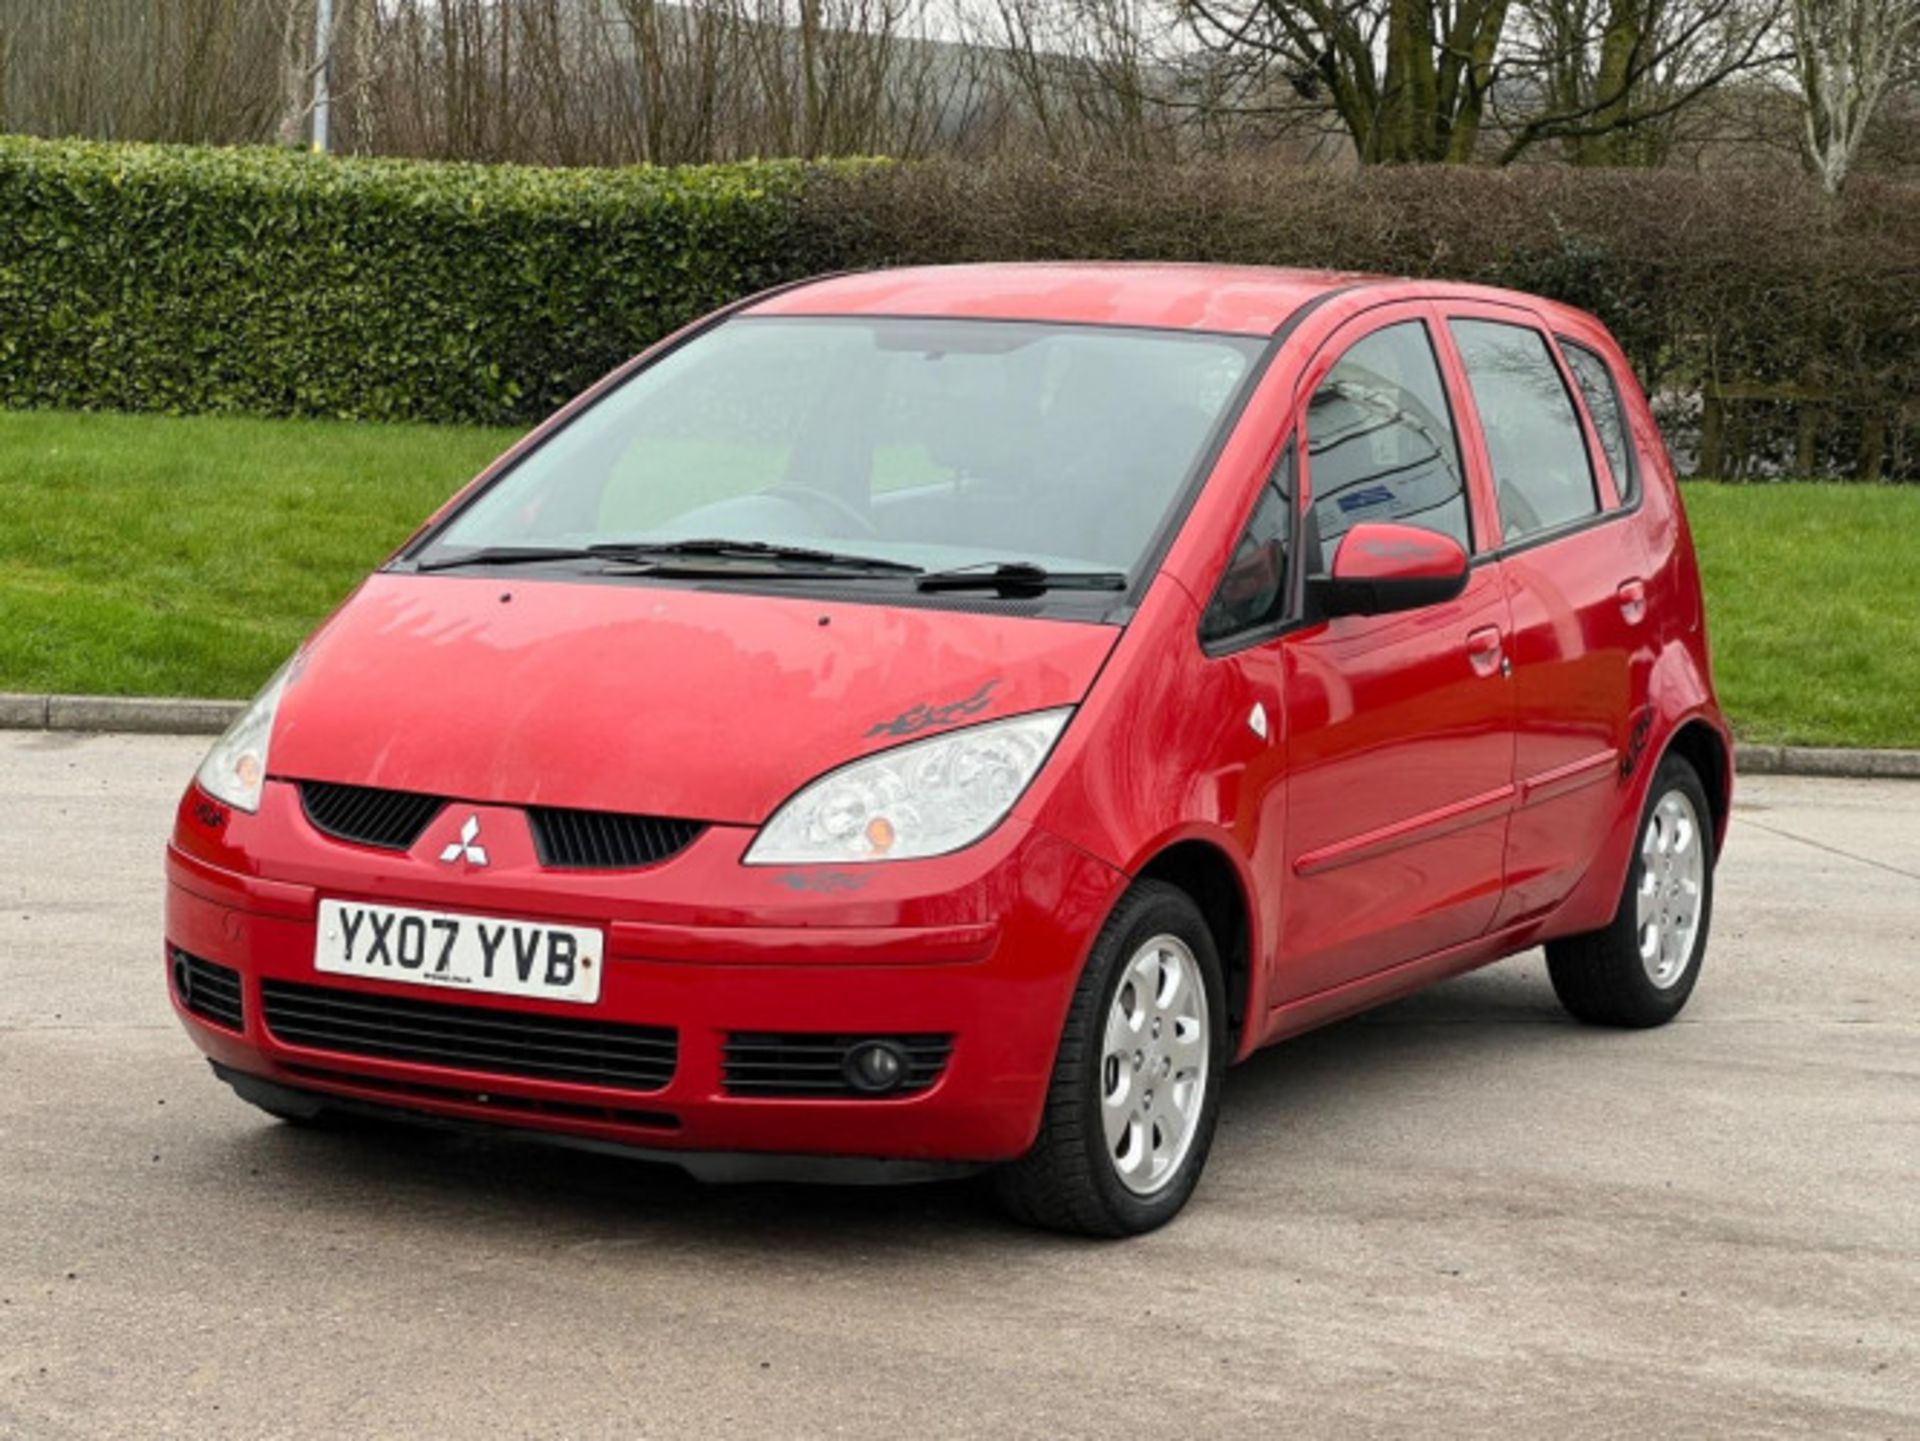 2007 MITSUBISHI COLT 1.5 DI-D DIESEL AUTOMATIC >>--NO VAT ON HAMMER--<< - Image 92 of 127